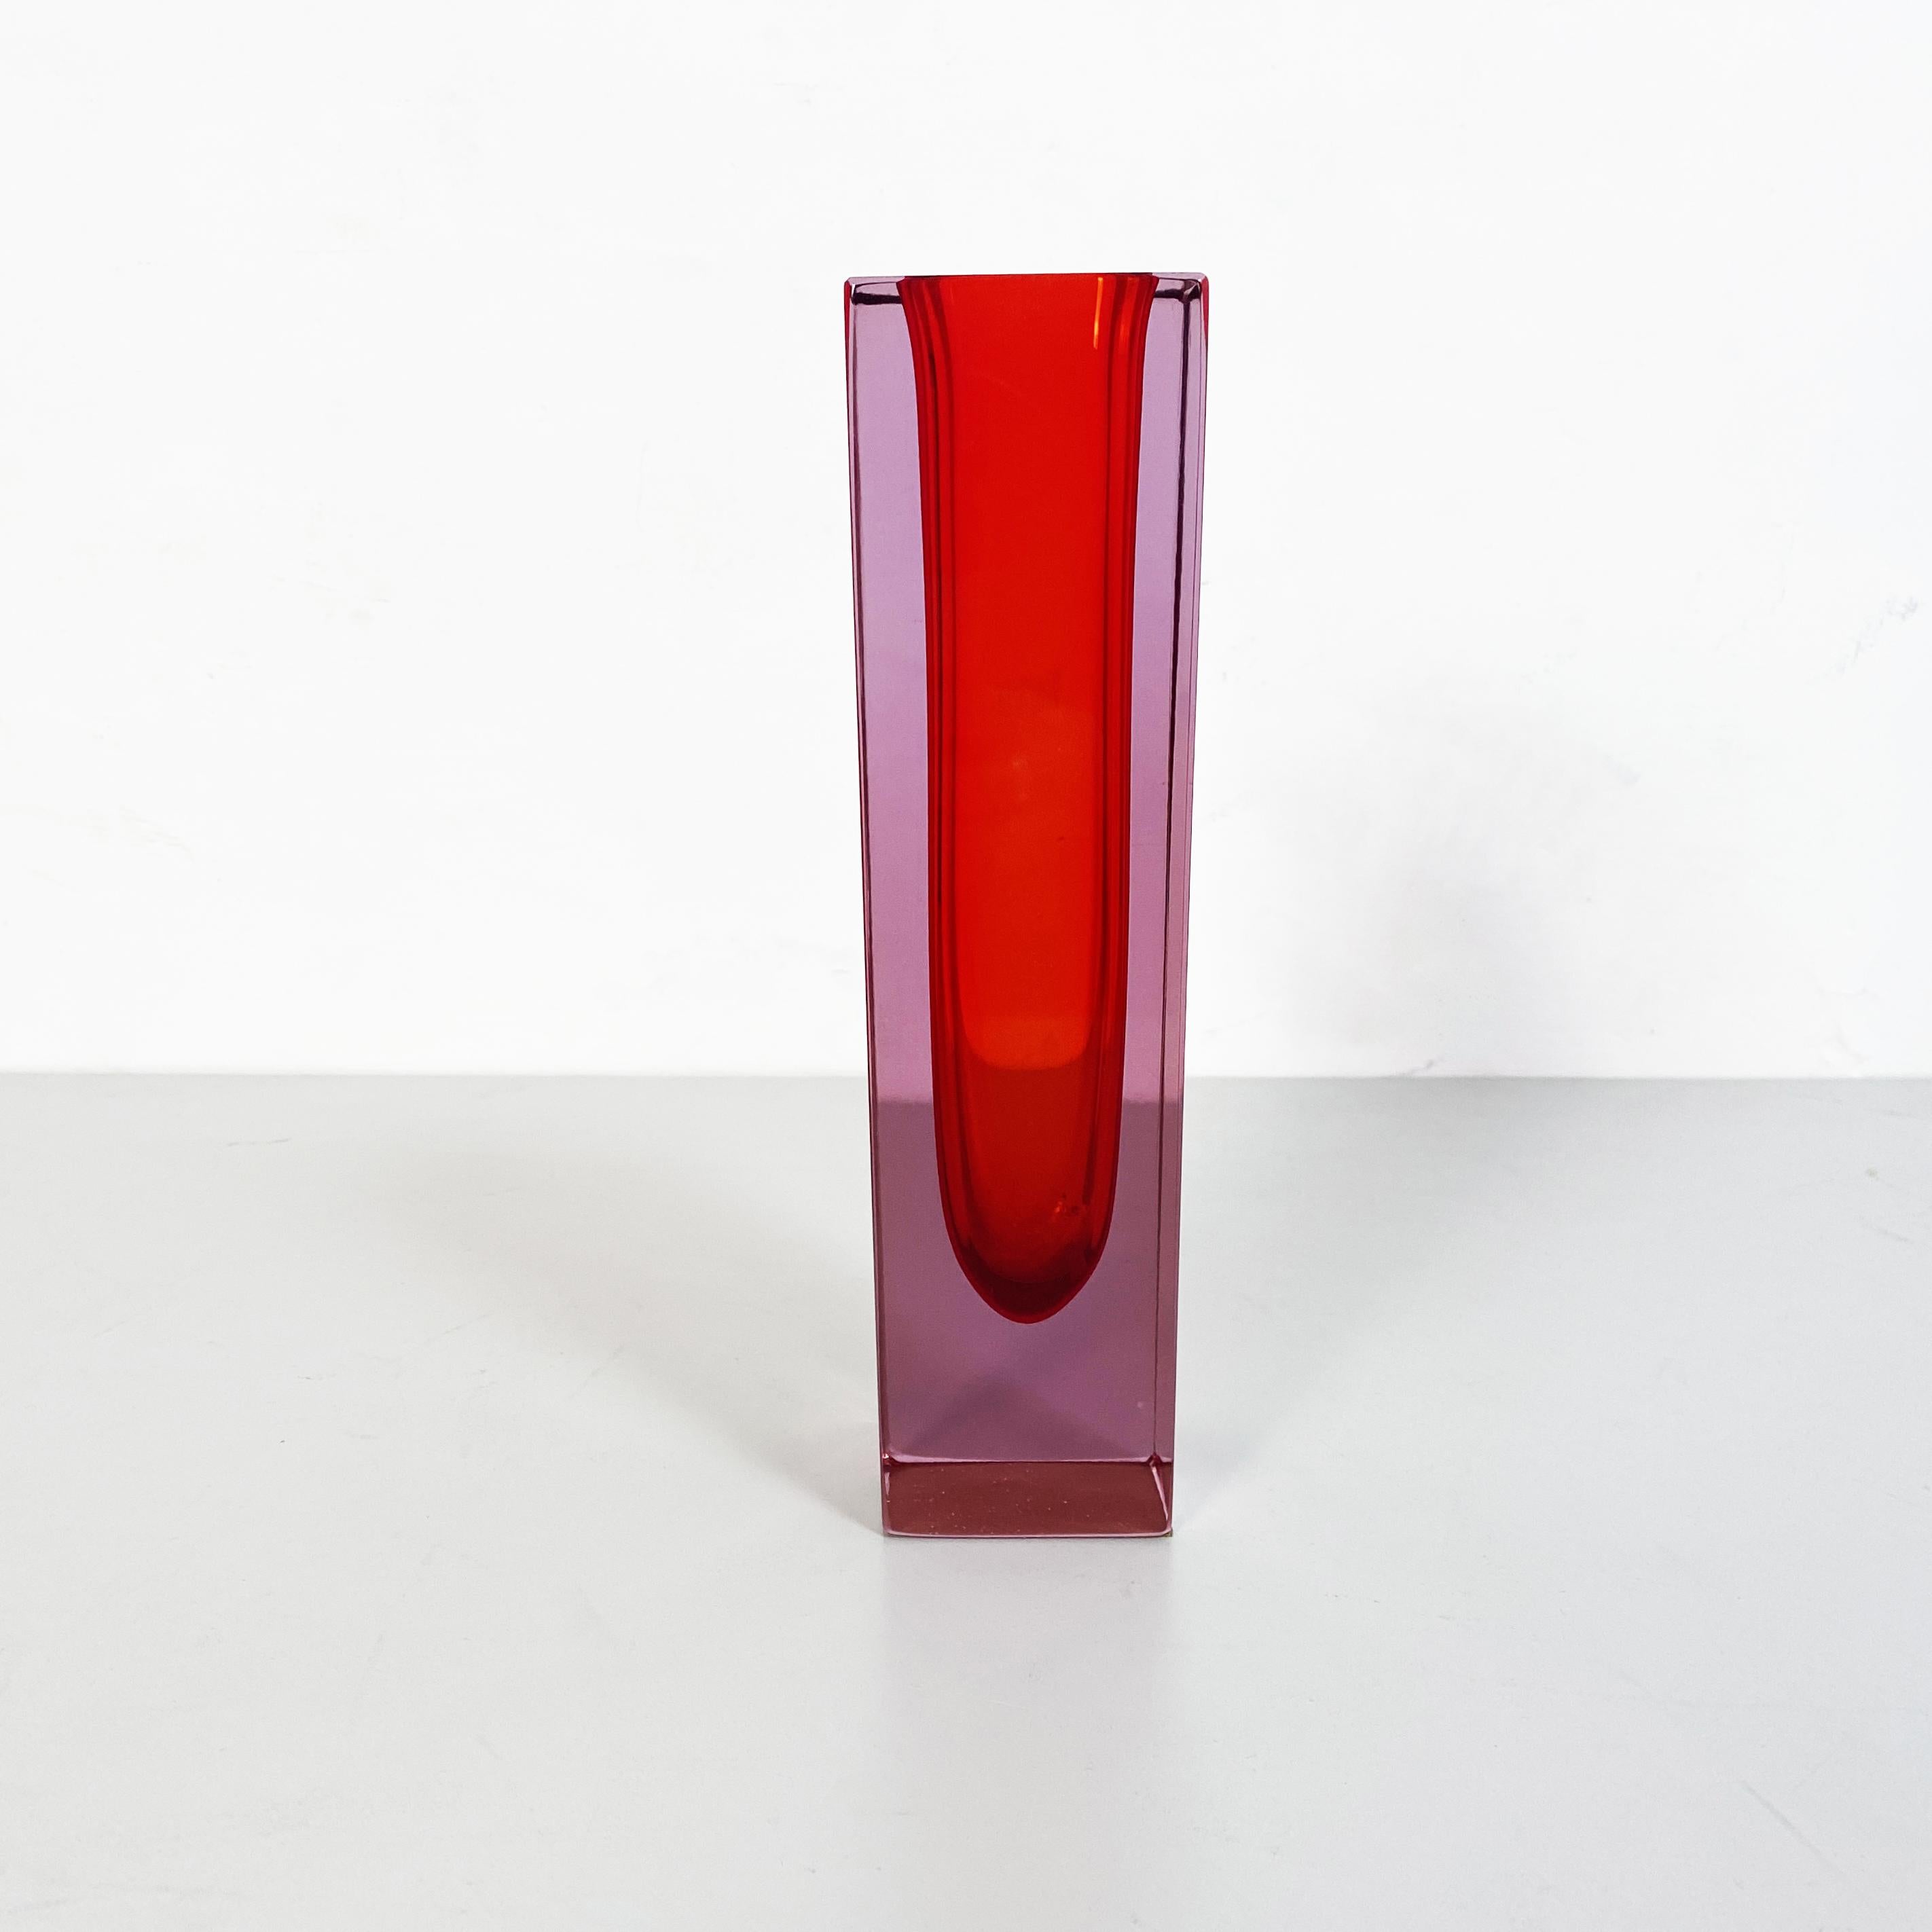 Italian Mid-Century Red Murano Glass Vase with Internal Purple Shades, 1970s For Sale 1